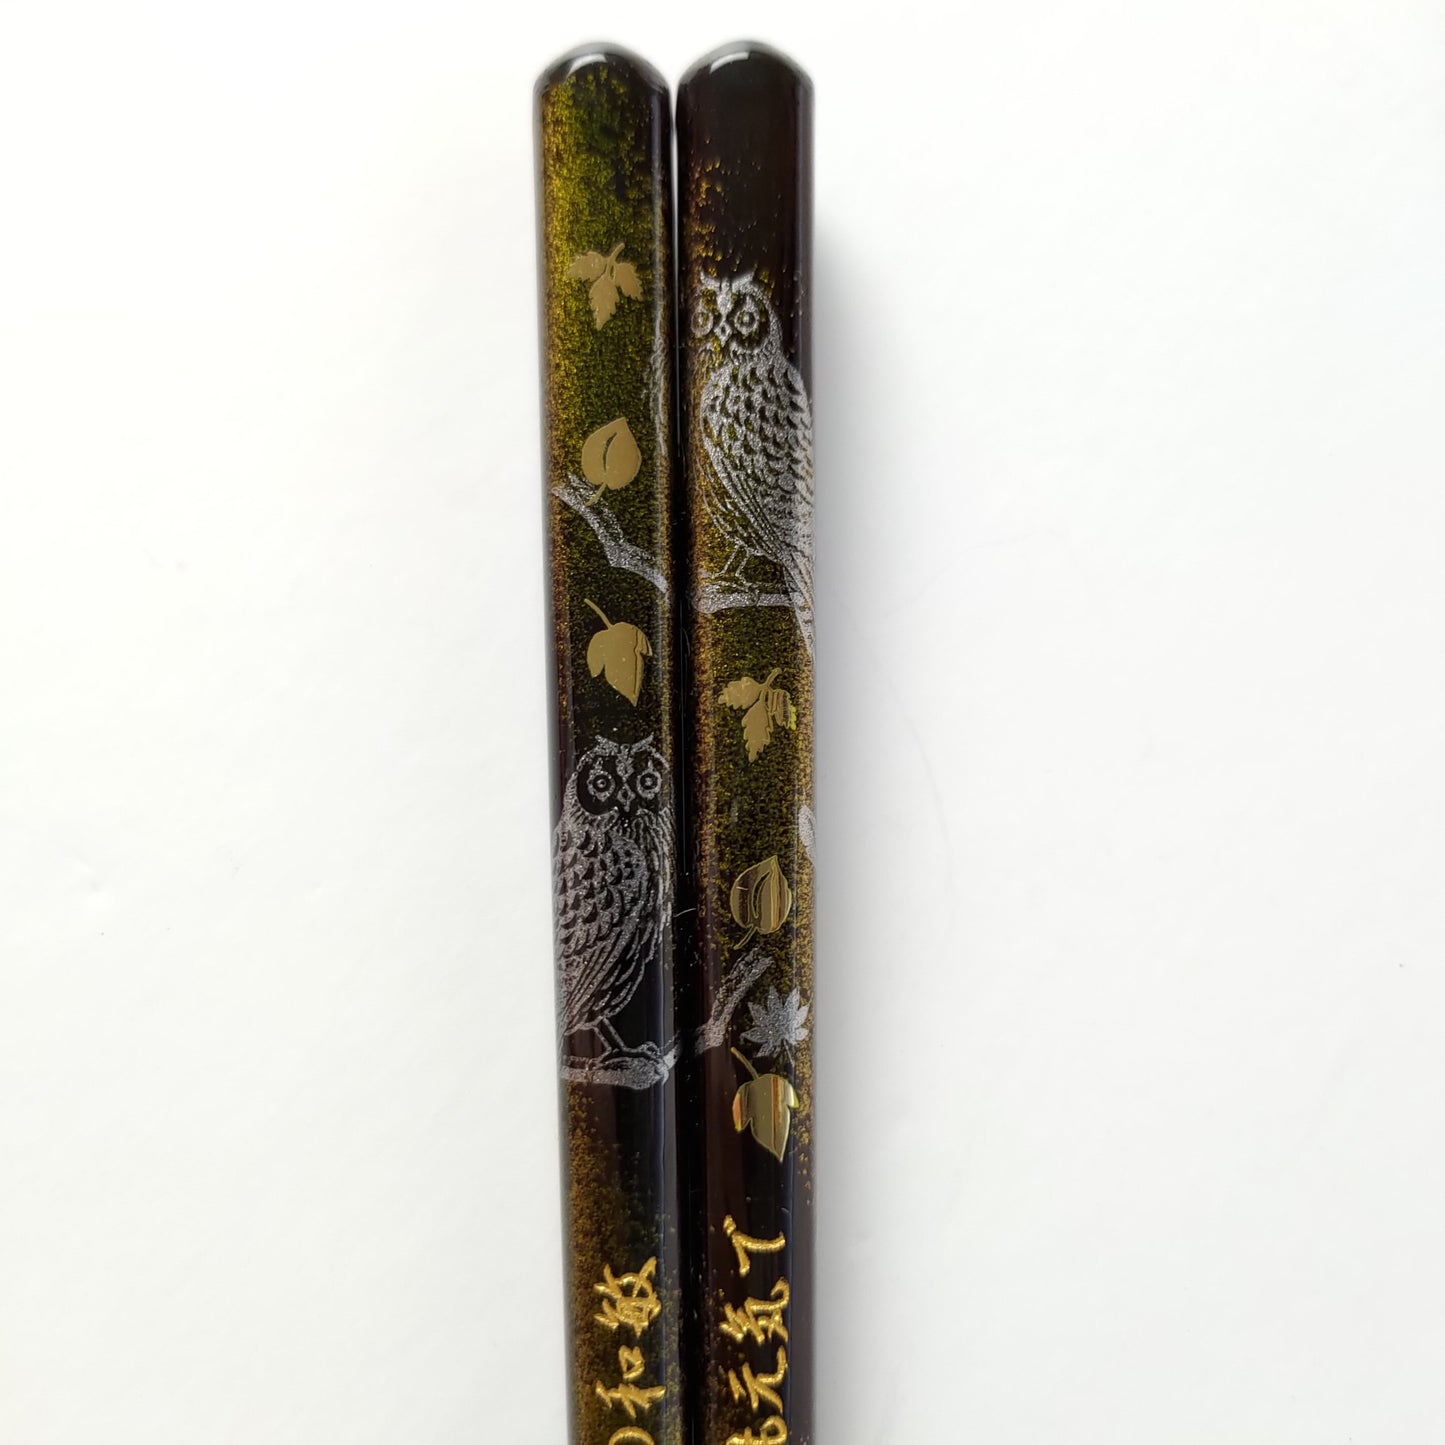 Luxury gold leaves and owls Japanese chopsticks green red - SINGLE PAIR WITH ENGRAVED WOODEN BOX SET